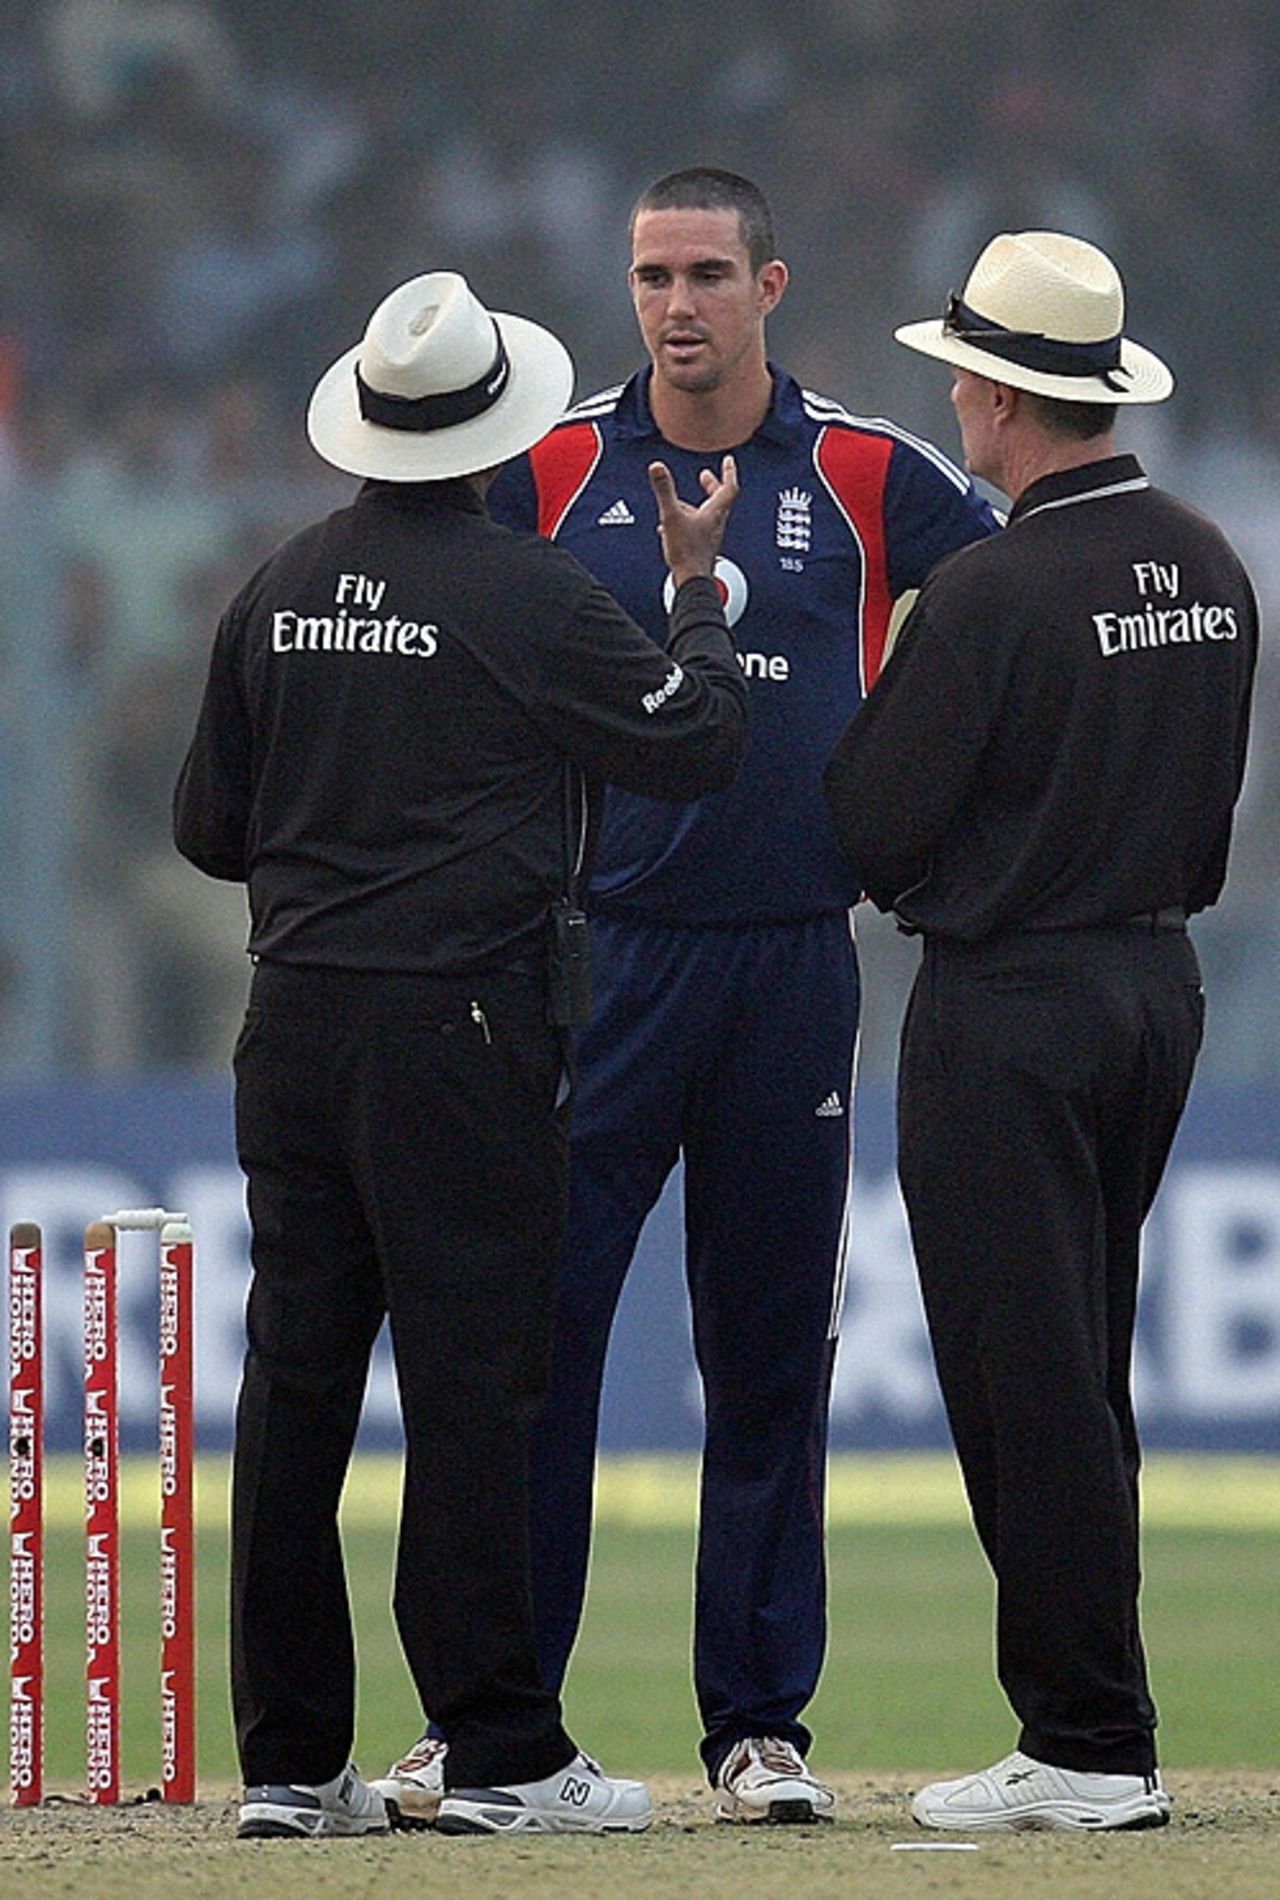 A frustrated Kevin Pietersen chats to the umpires when bad light curtailed the third ODI against India, India v England, 3rd ODI, Kanpur, November 20, 2008